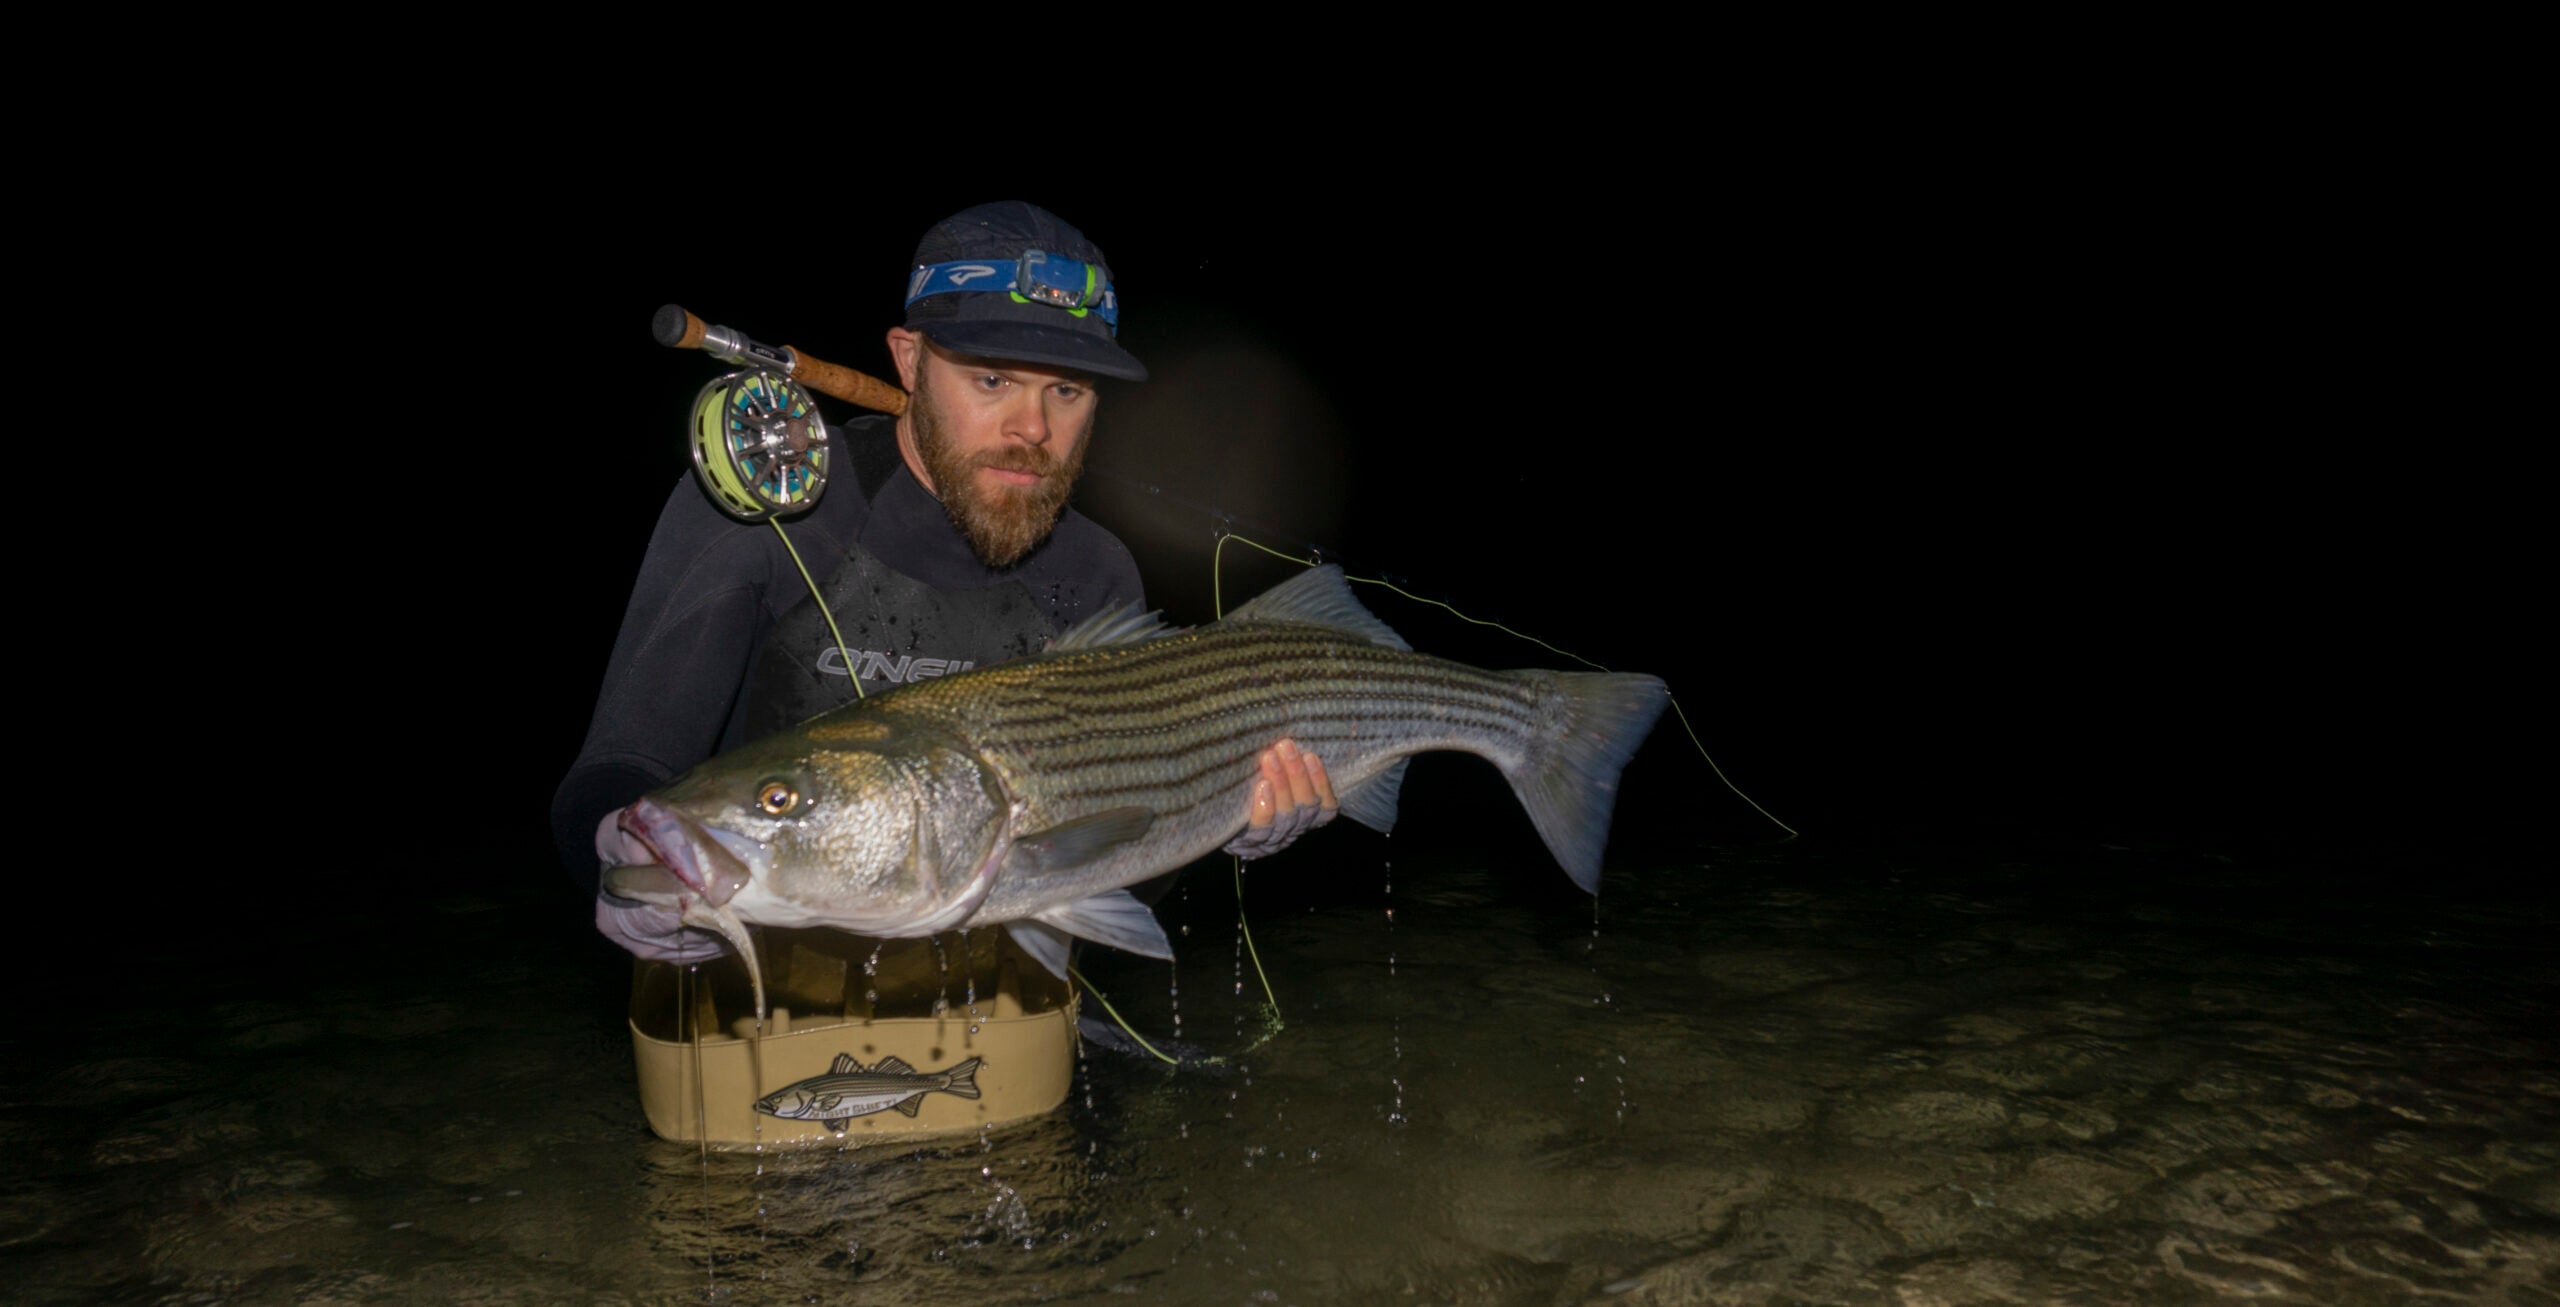 Beginners Guide to Fly Fishing For Striped Bass